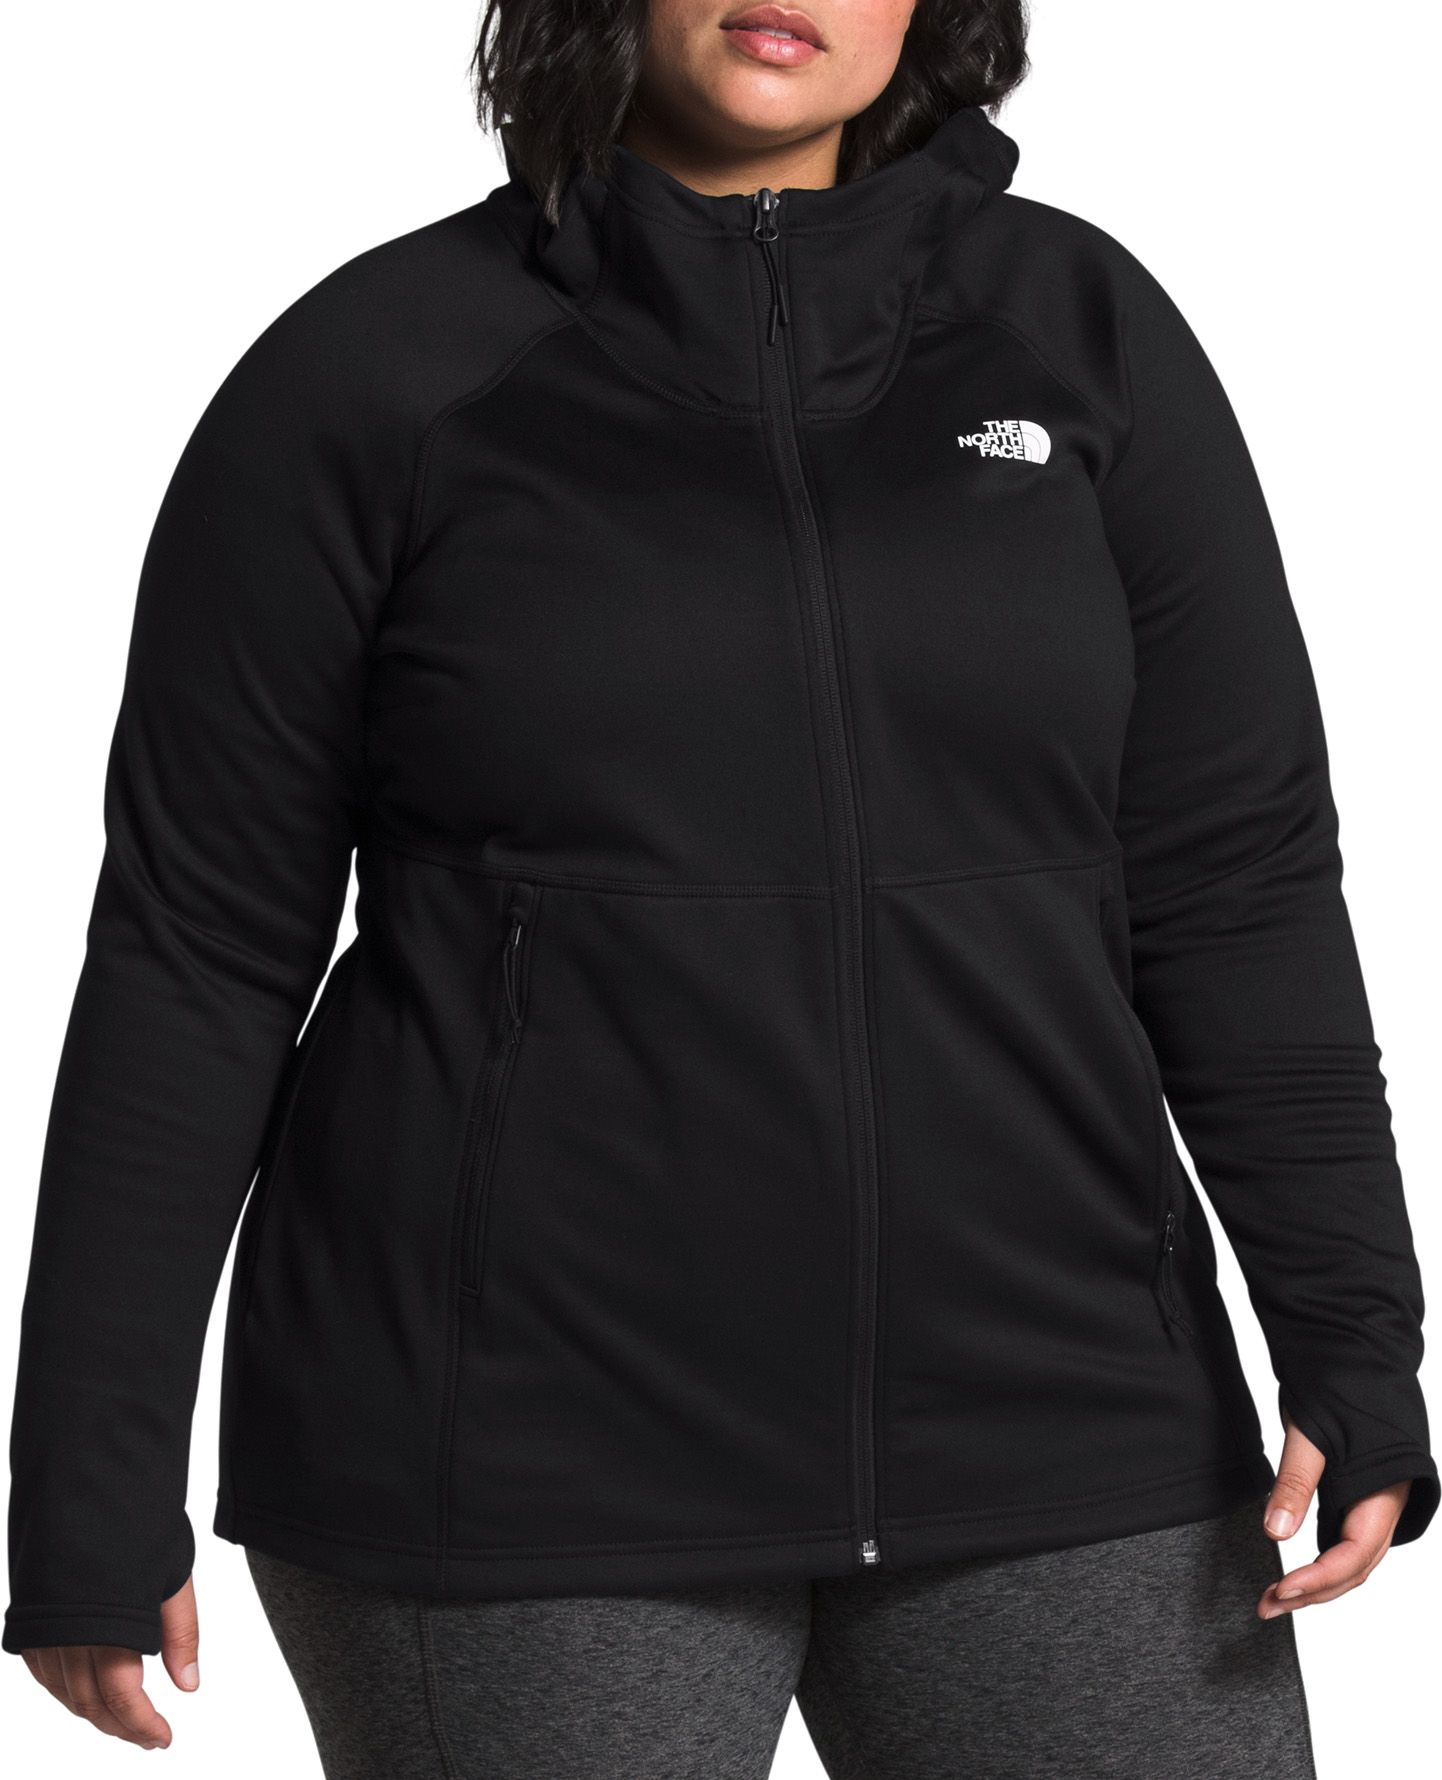 plus size north face hoodie